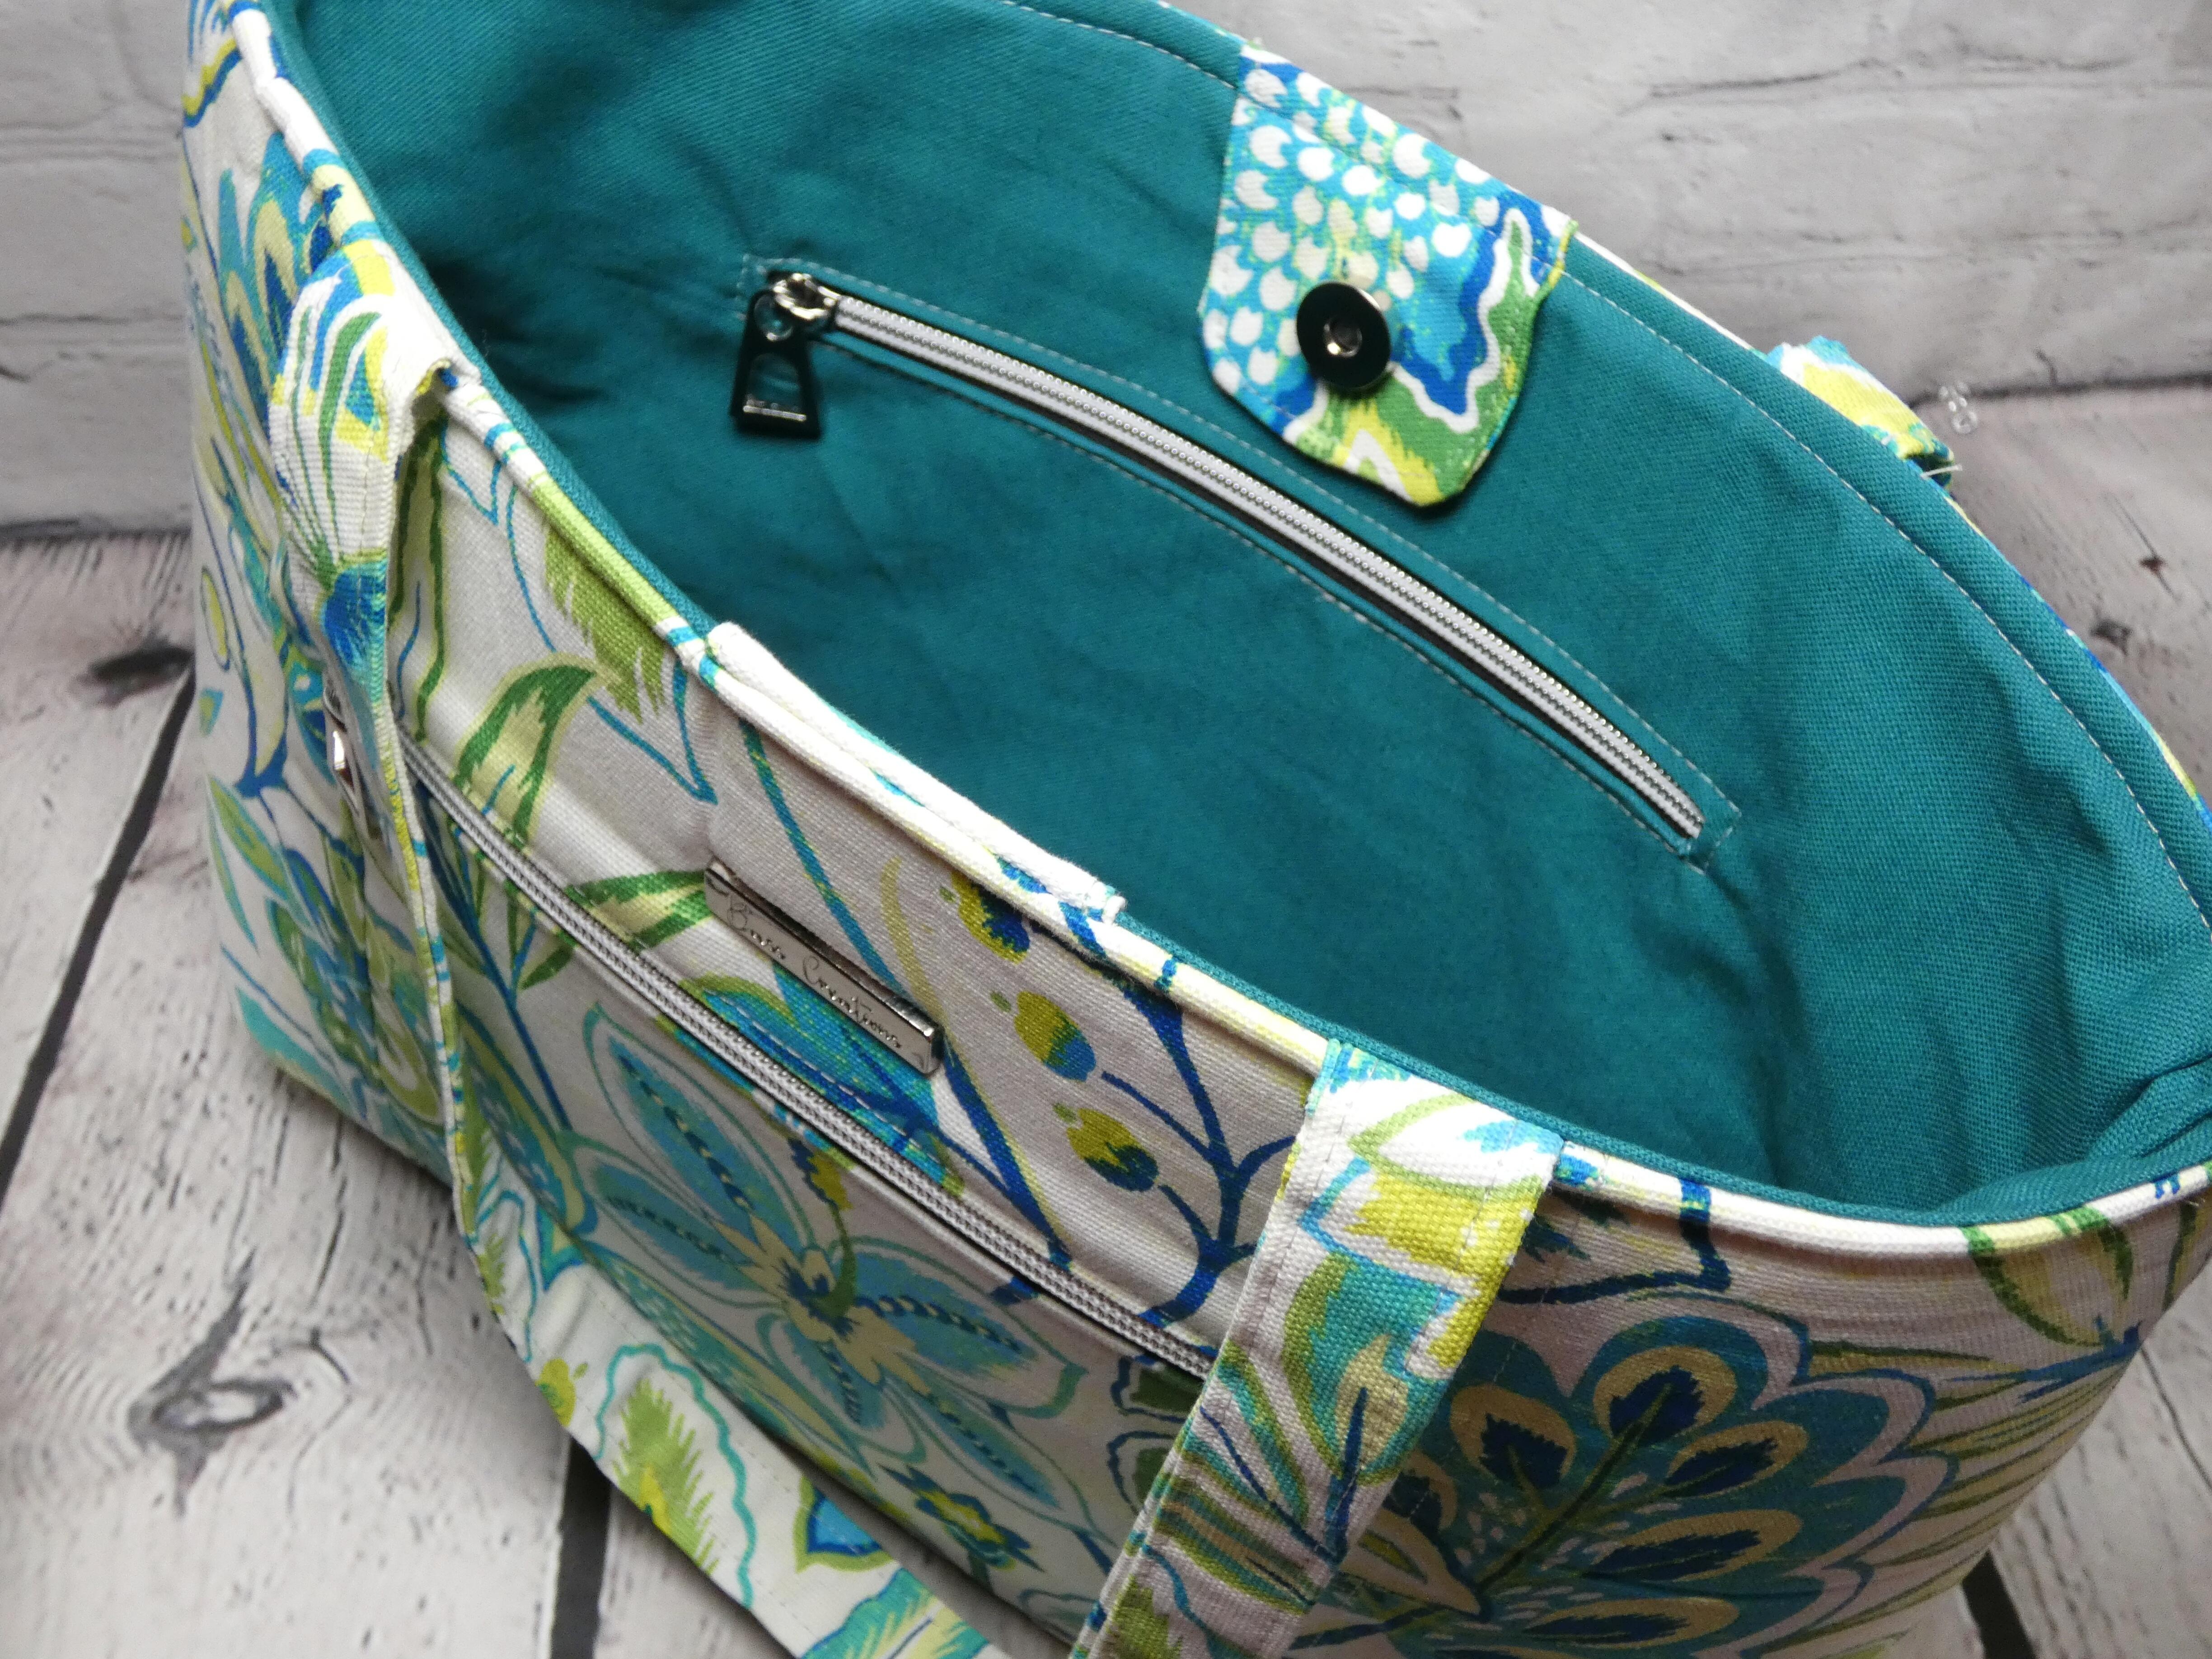 Top view of greens and blues floral pattern market tote with teal lining and an interior zipper pocket, front silver hardware zipper and silver metal Bass Creations logo.